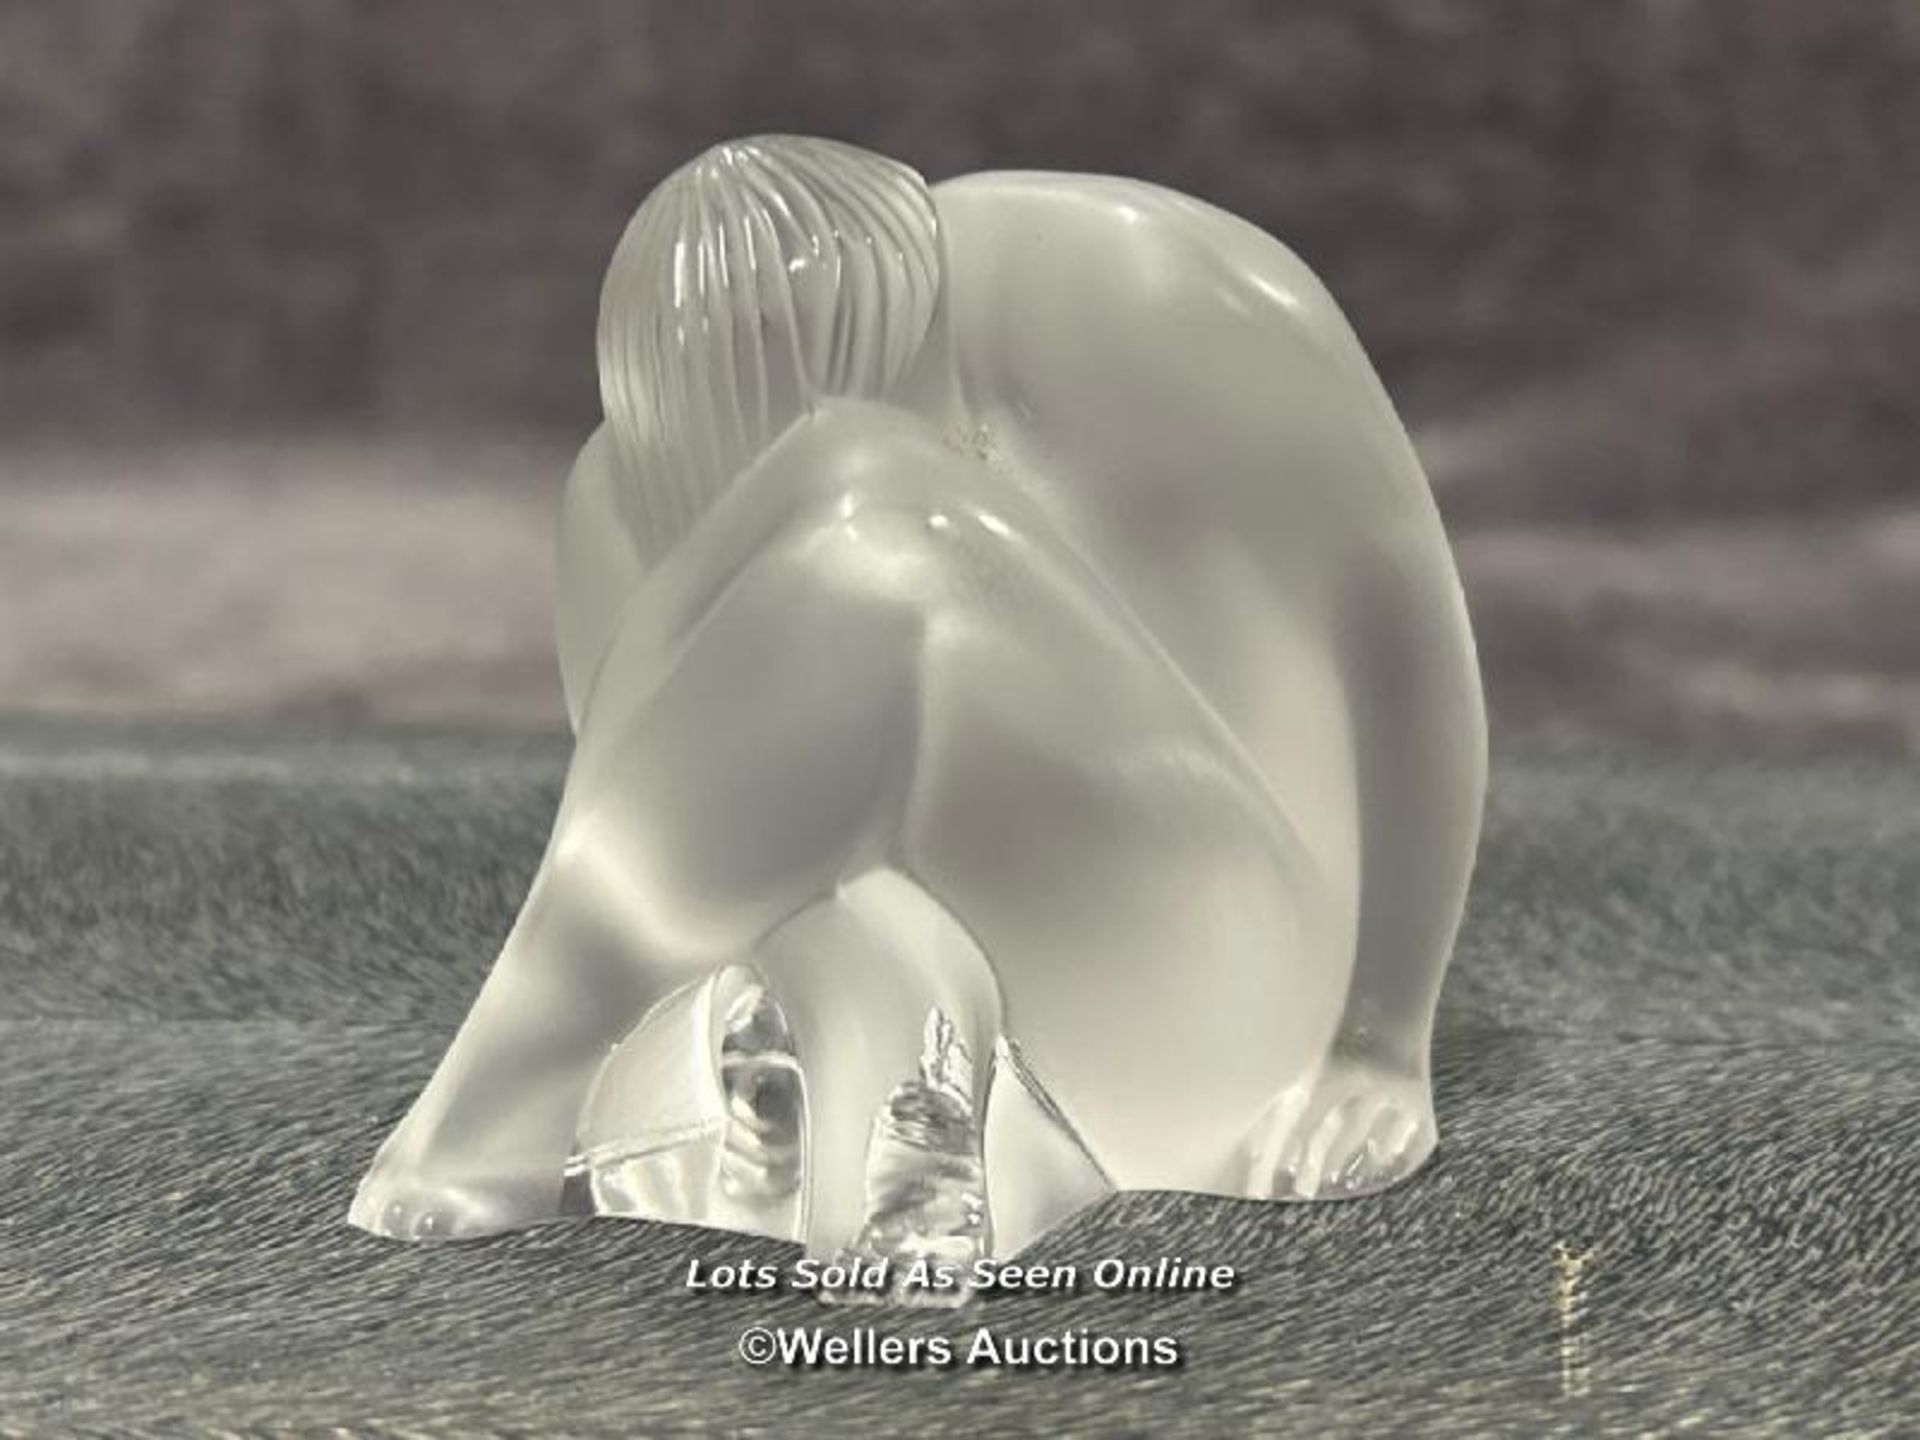 Lalique frosted crystal figurine 'Nahbi', 6cm high, signed (damaged foot) / AN2 - Image 3 of 5